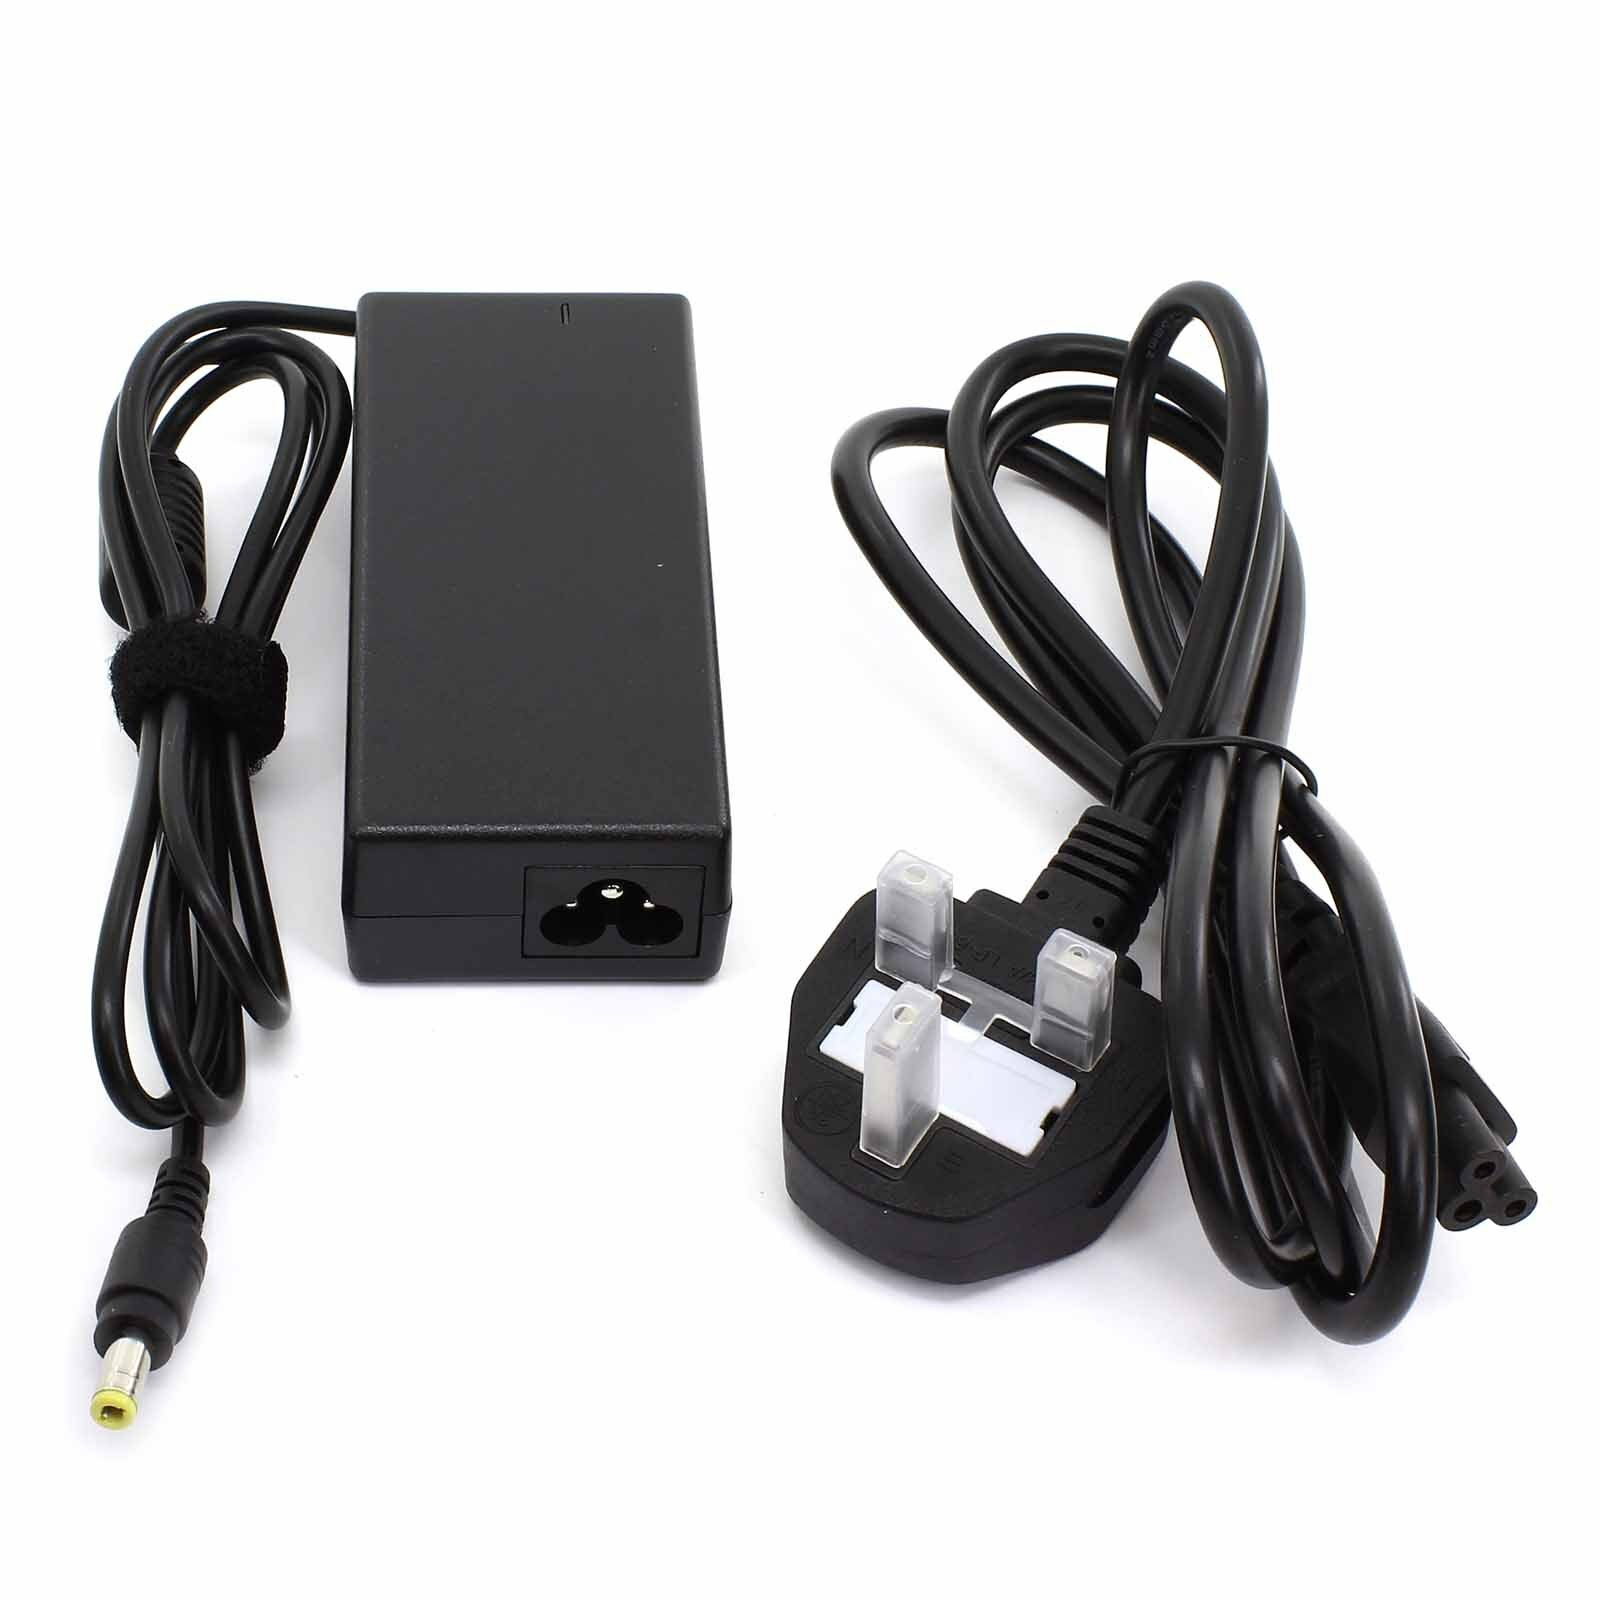 NEW 12v UMC l22a01c01g-ro1 monitor USA Uk mains power supply adaptor cable power cord Output Power: 60W or below MPN: M